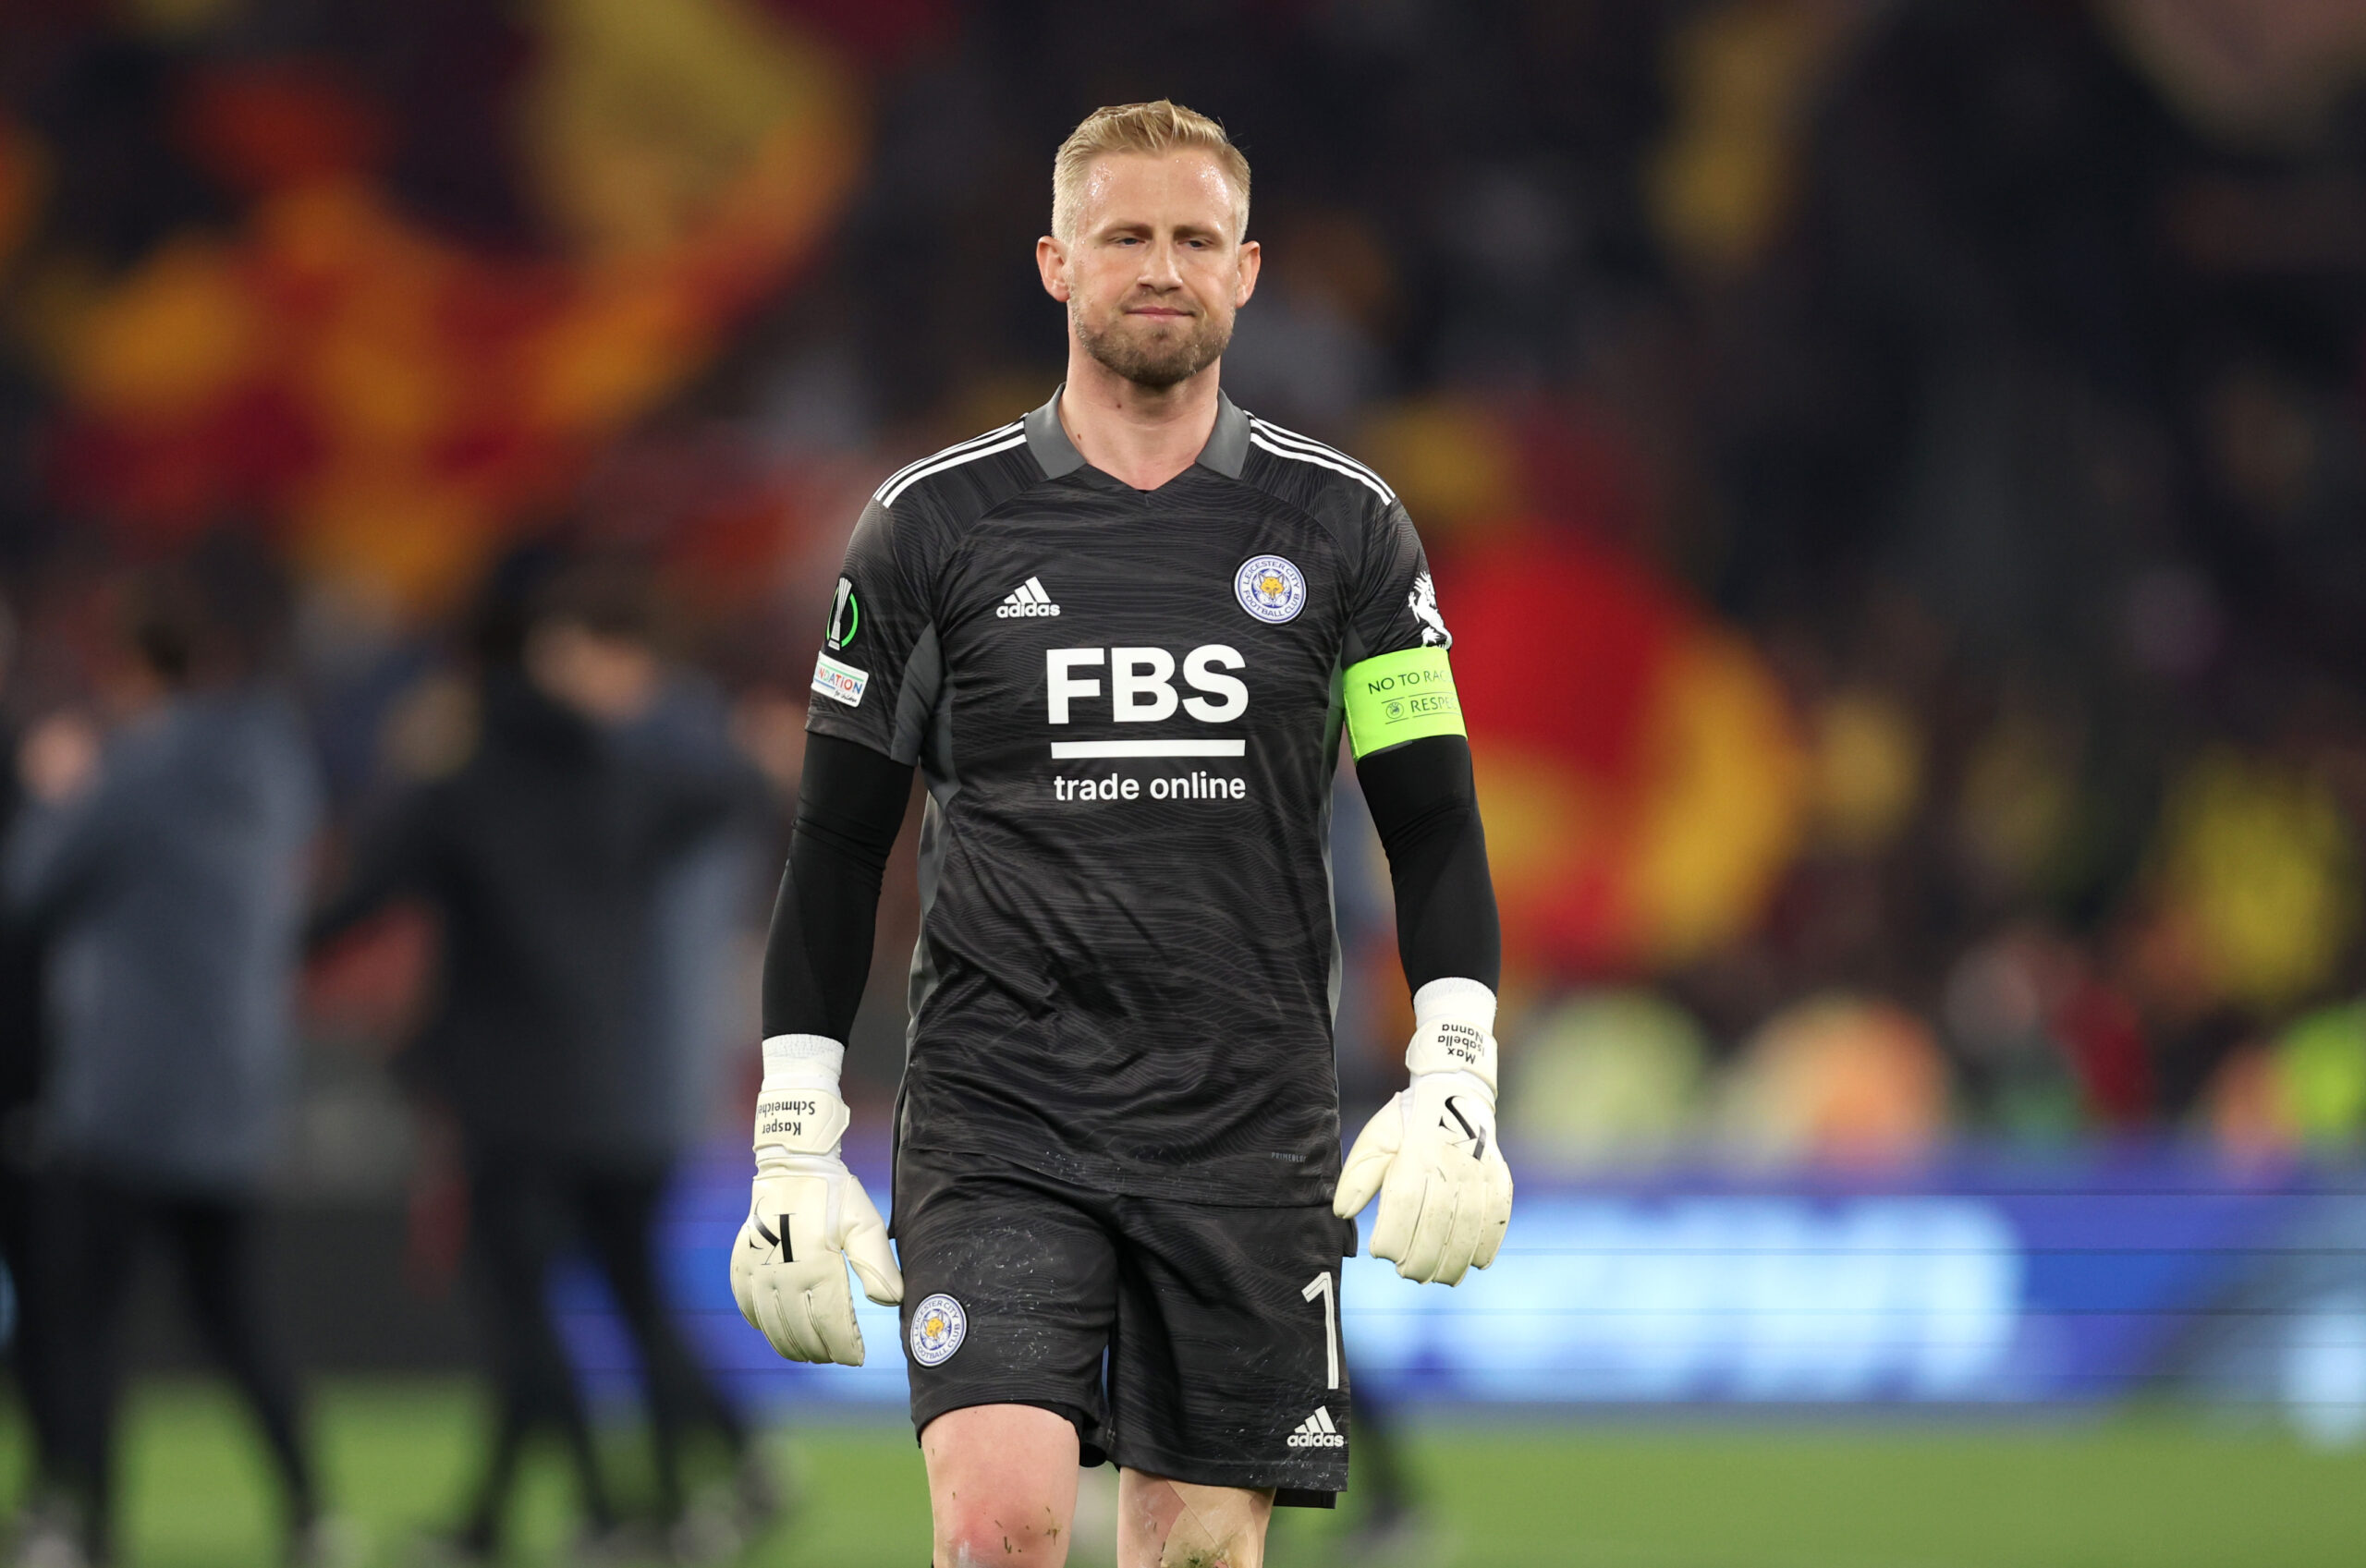 ROME, ITALY - MAY 05: Kasper Schmeichel of Leicester City looks dejected following their sides defeat in the UEFA Conference League Semi Final Leg Two match between AS Roma and Leicester City at Stadio Olimpico on May 05, 2022 in Rome, Italy. (Photo by Julian Finney/Getty Images)